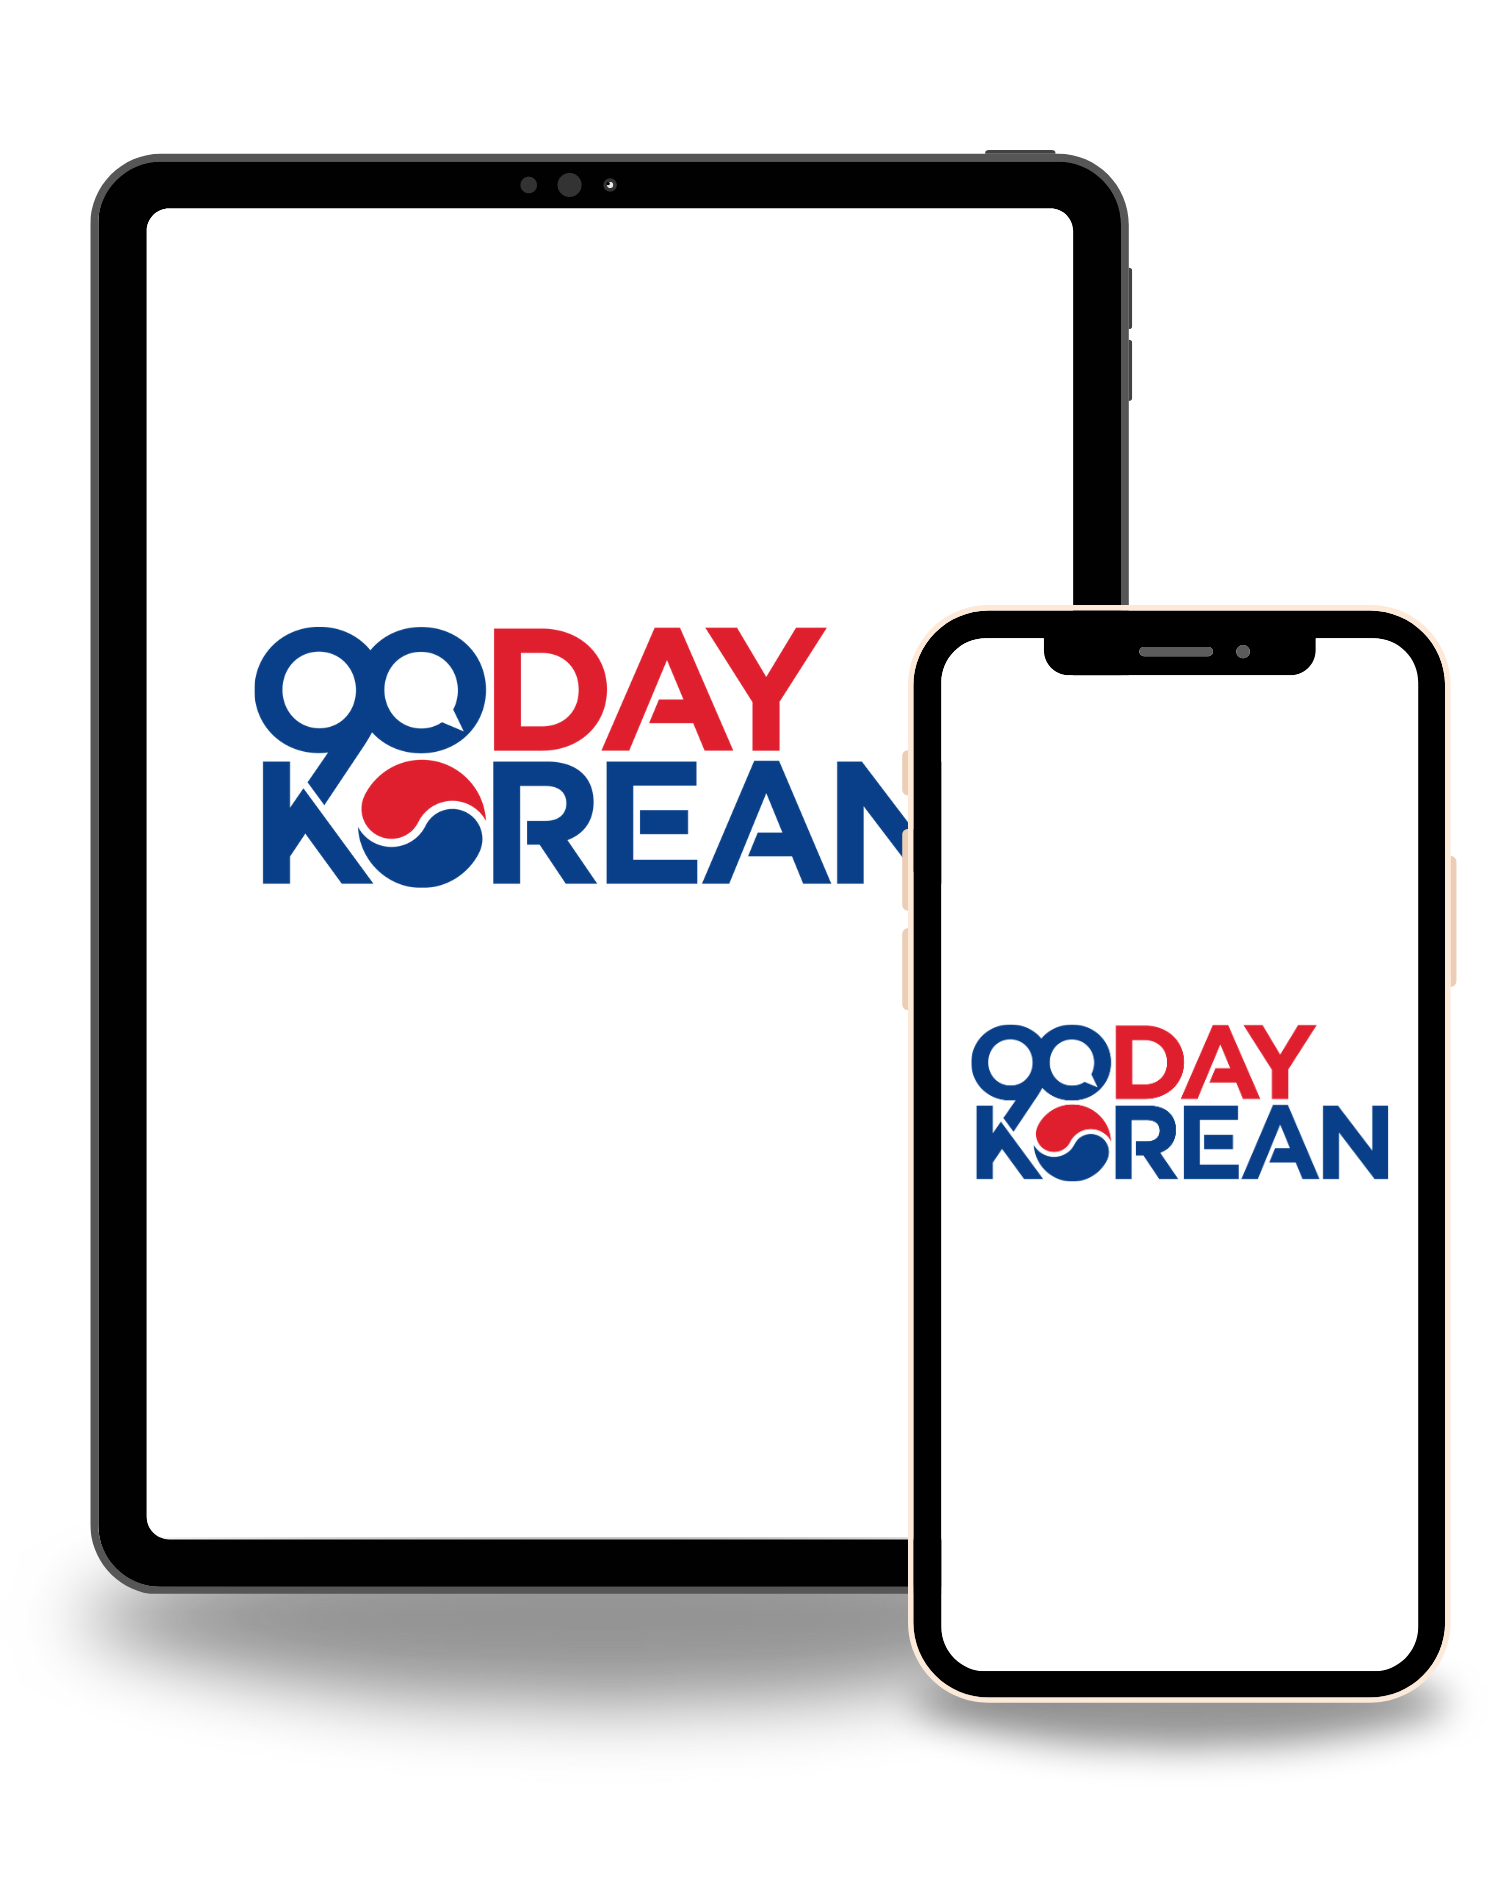 A tablet and a mobile phone with the 90 Day Korean logo